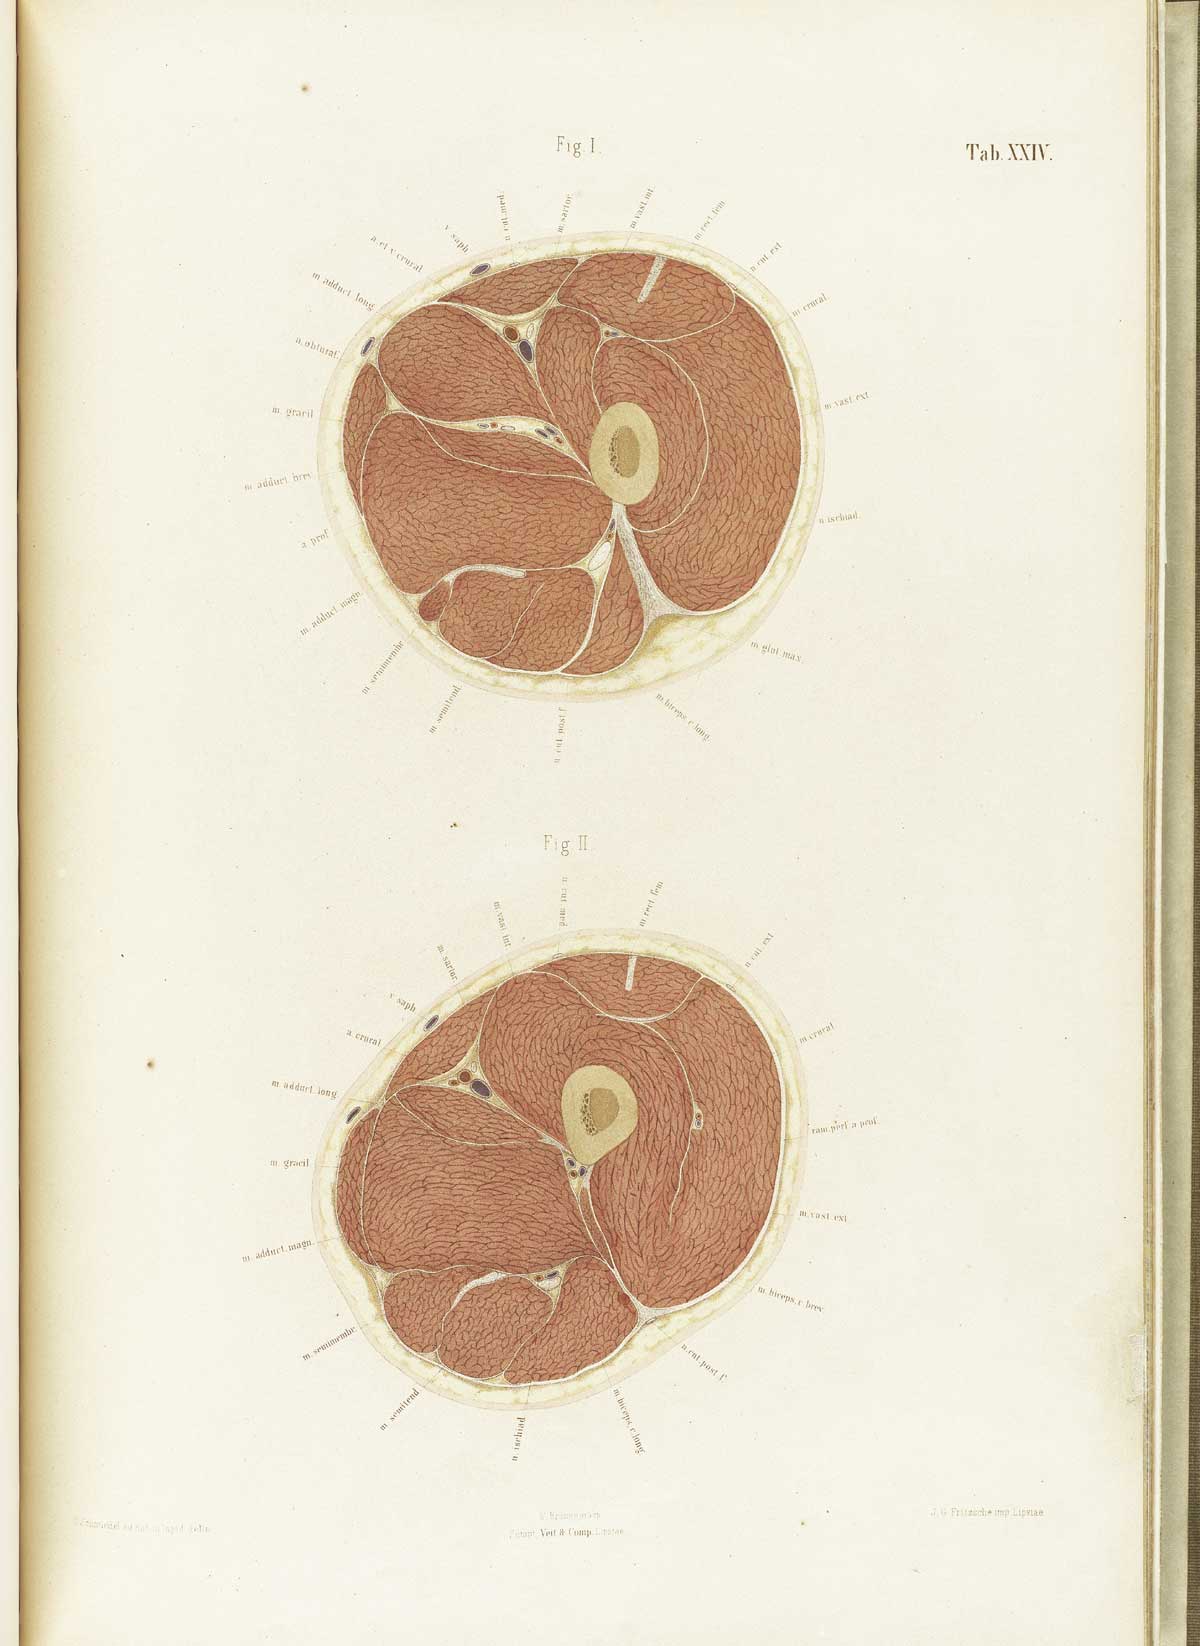 Chromolithograph of cross-sections of two legs at the thigh, one on top of the page, the other below, showing the muscles, bones, and other structures, from Wilhelm Braune’s Topographisch-anatomischer Atlas. Leipzig, 1867.